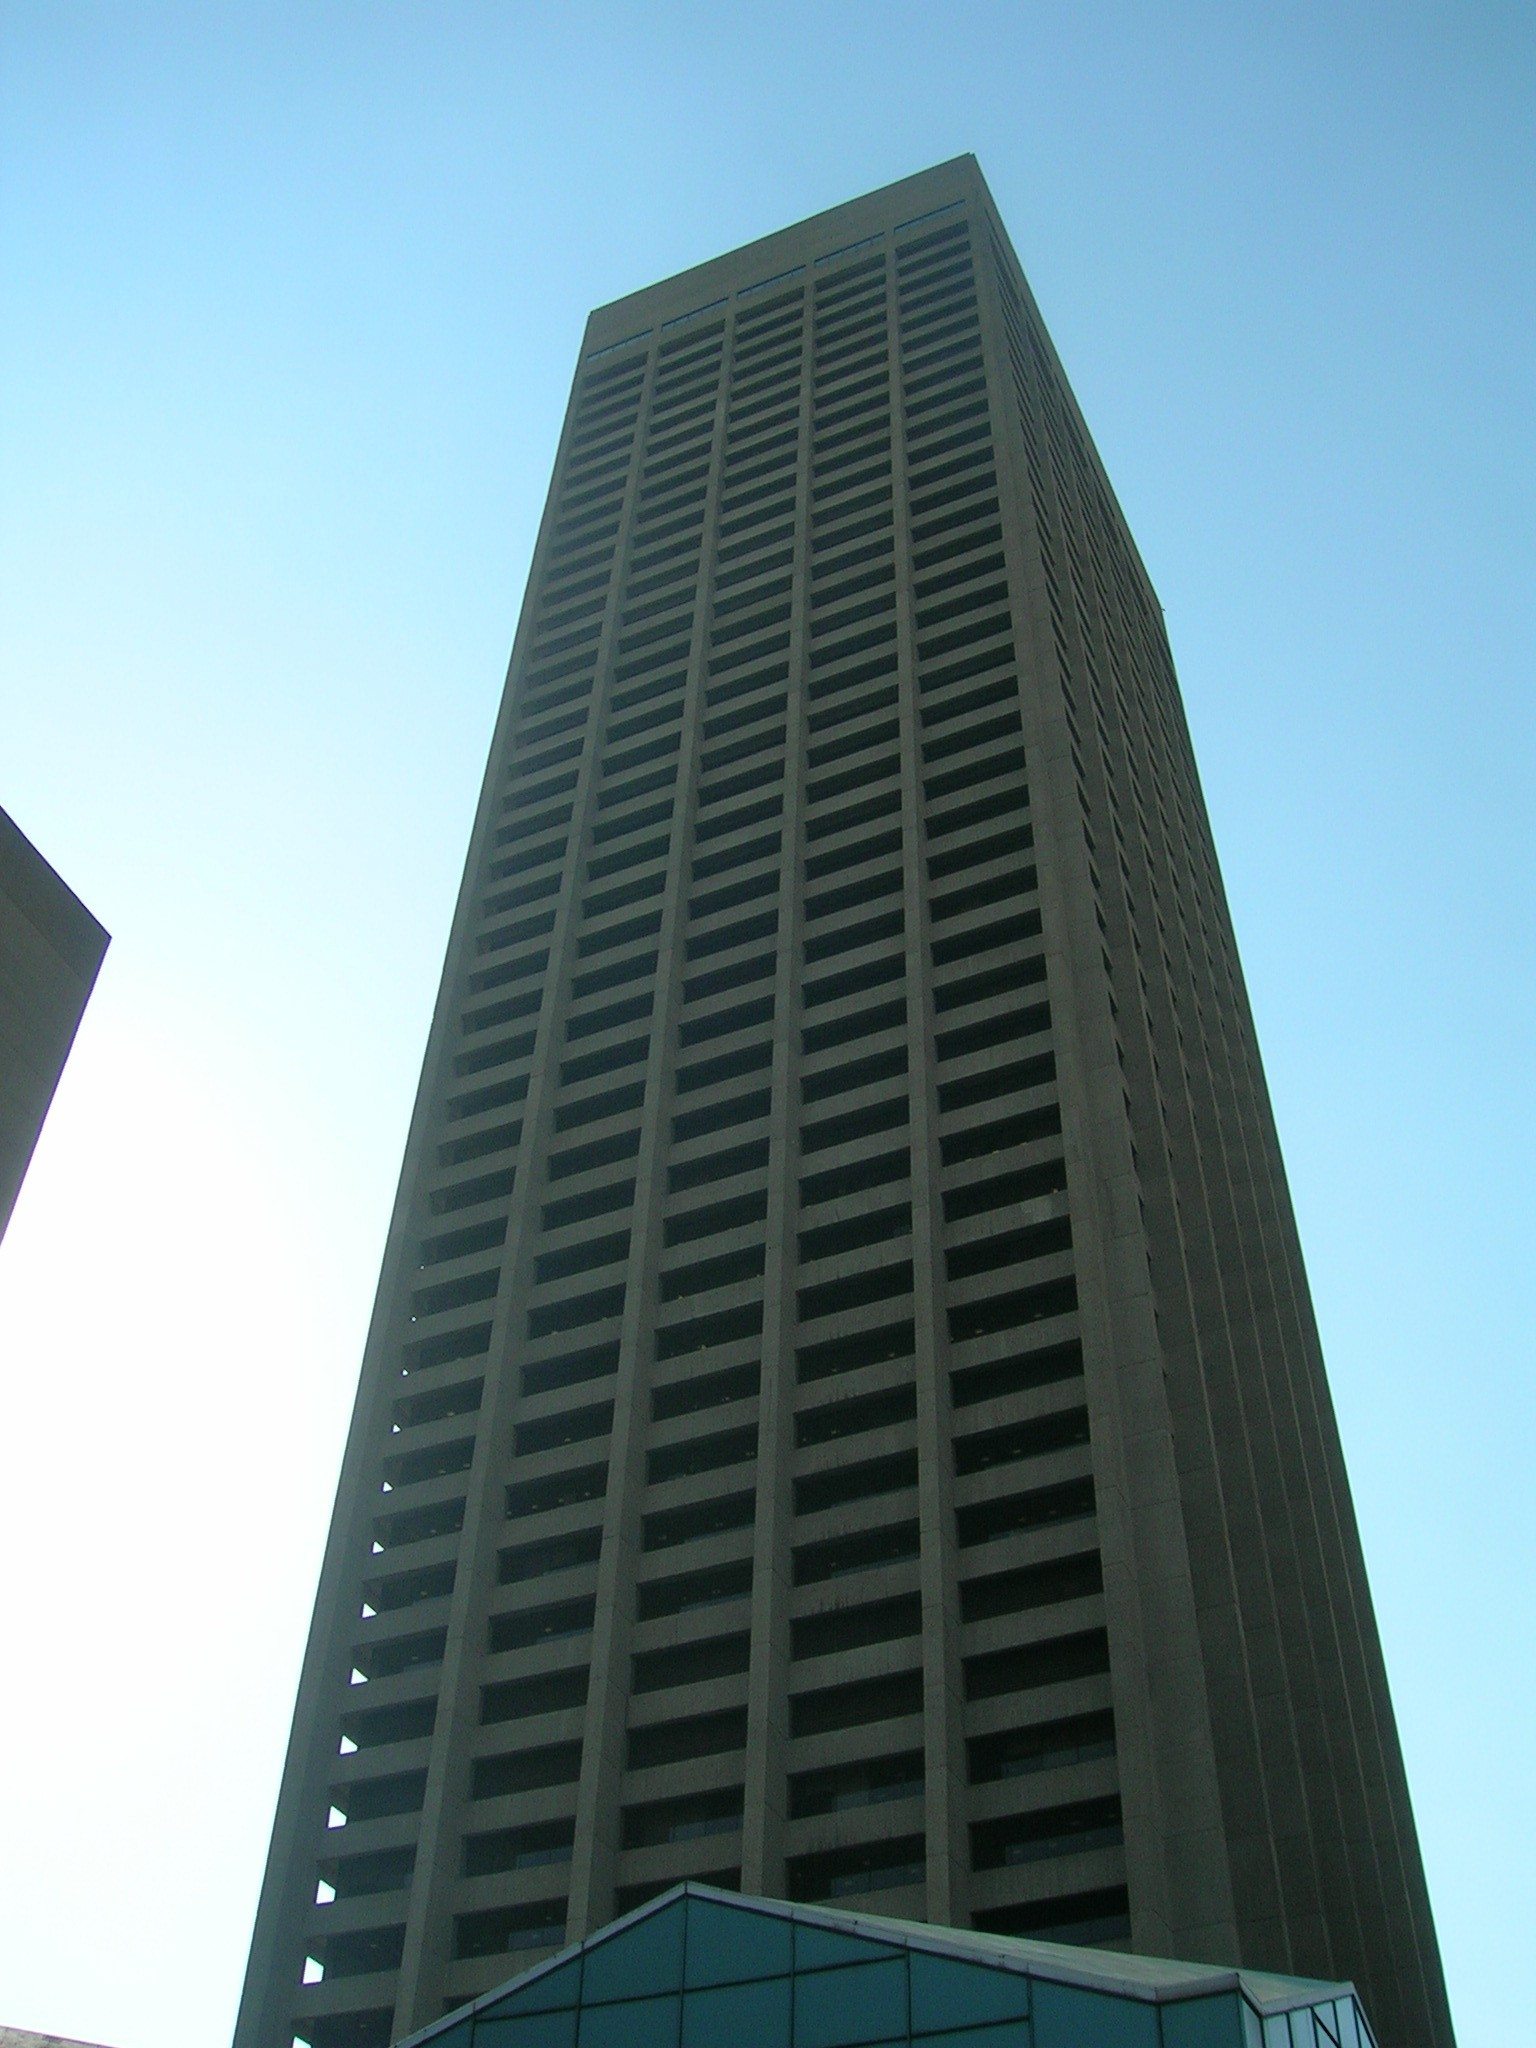 The Carlton Centre - tallest buildings in Africa